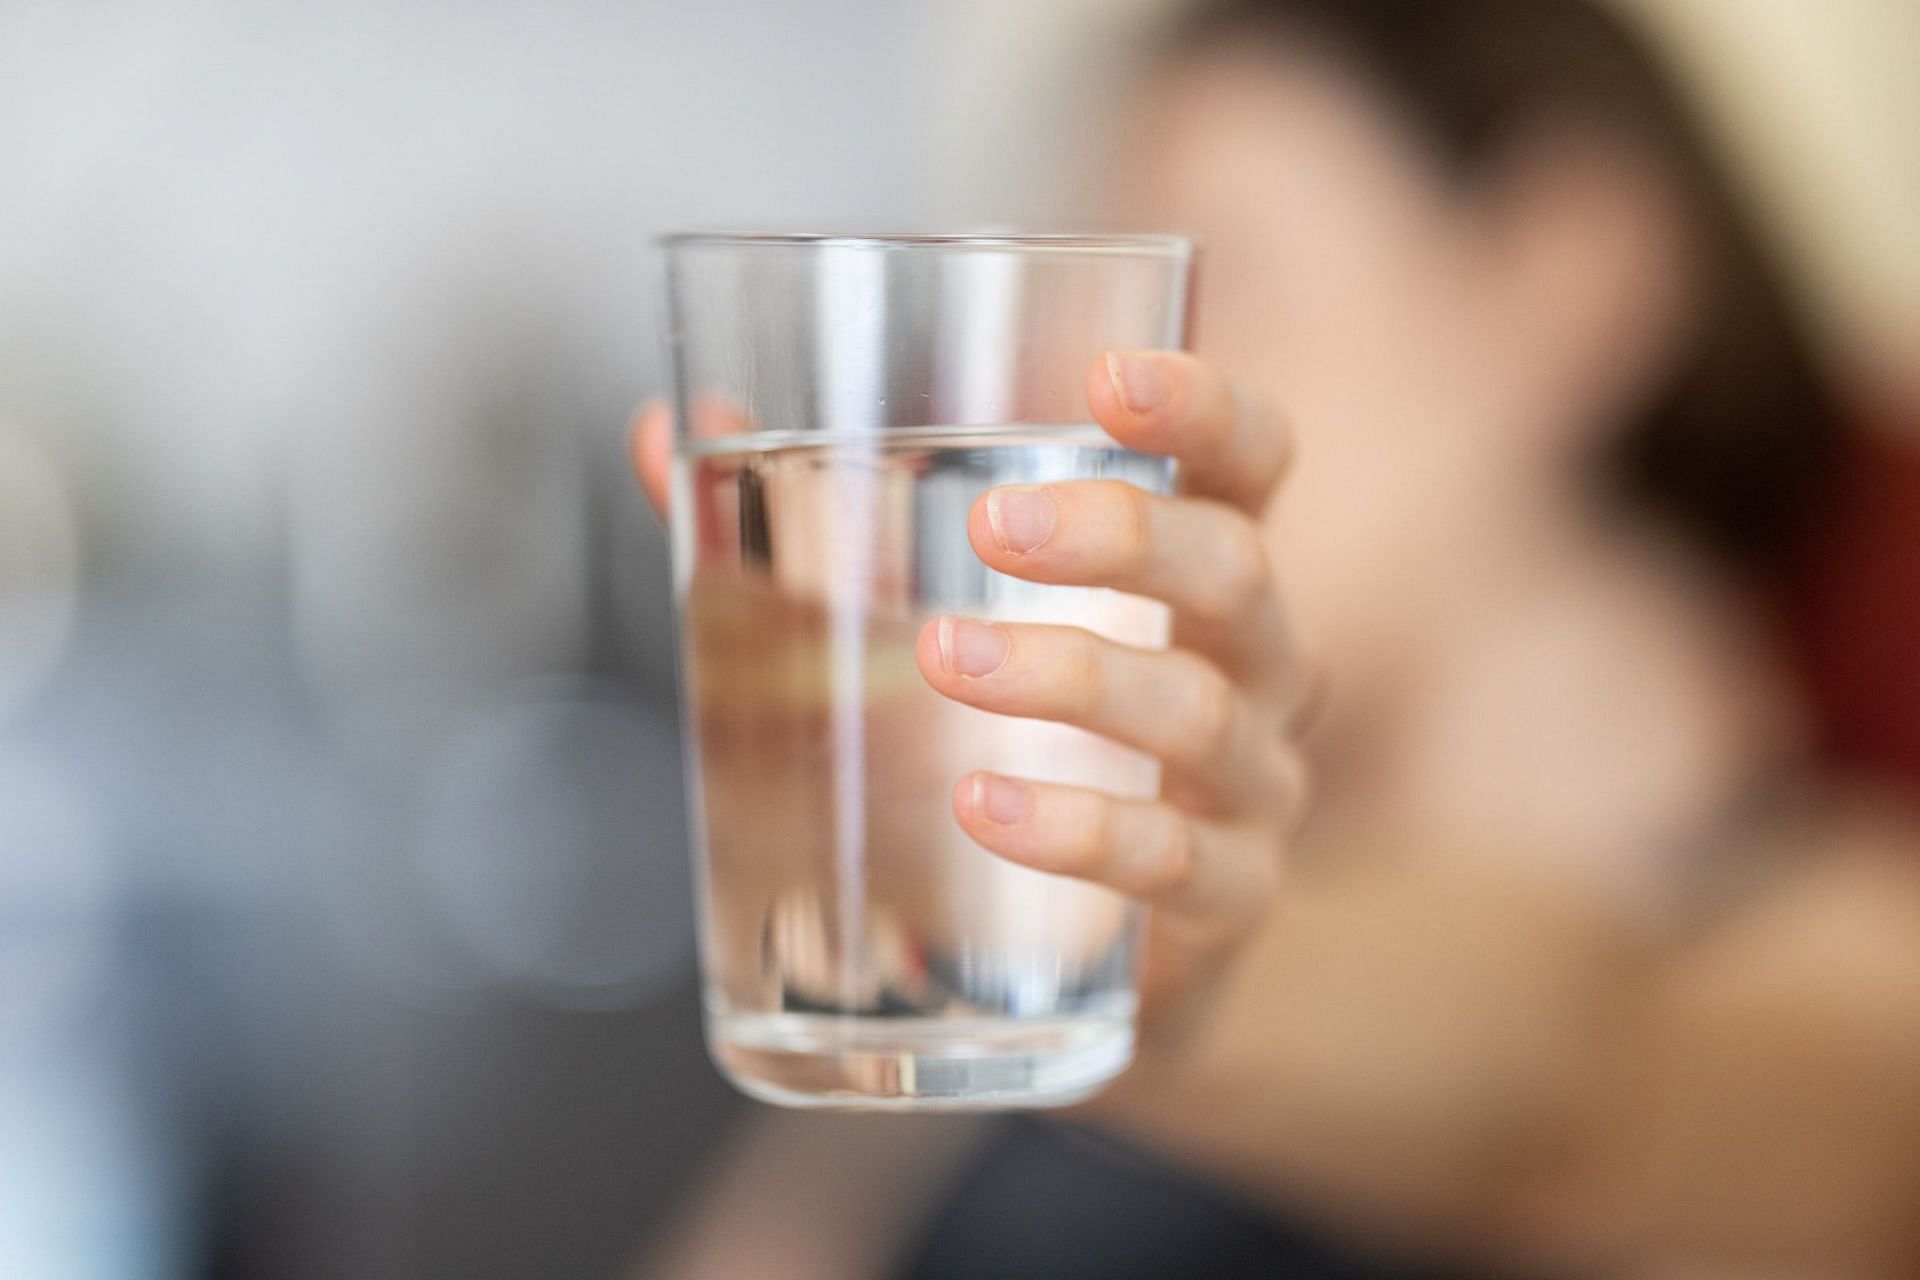 Dehydration is among the common causes of constipation (Image via Unsplash/Engin Akyurt)